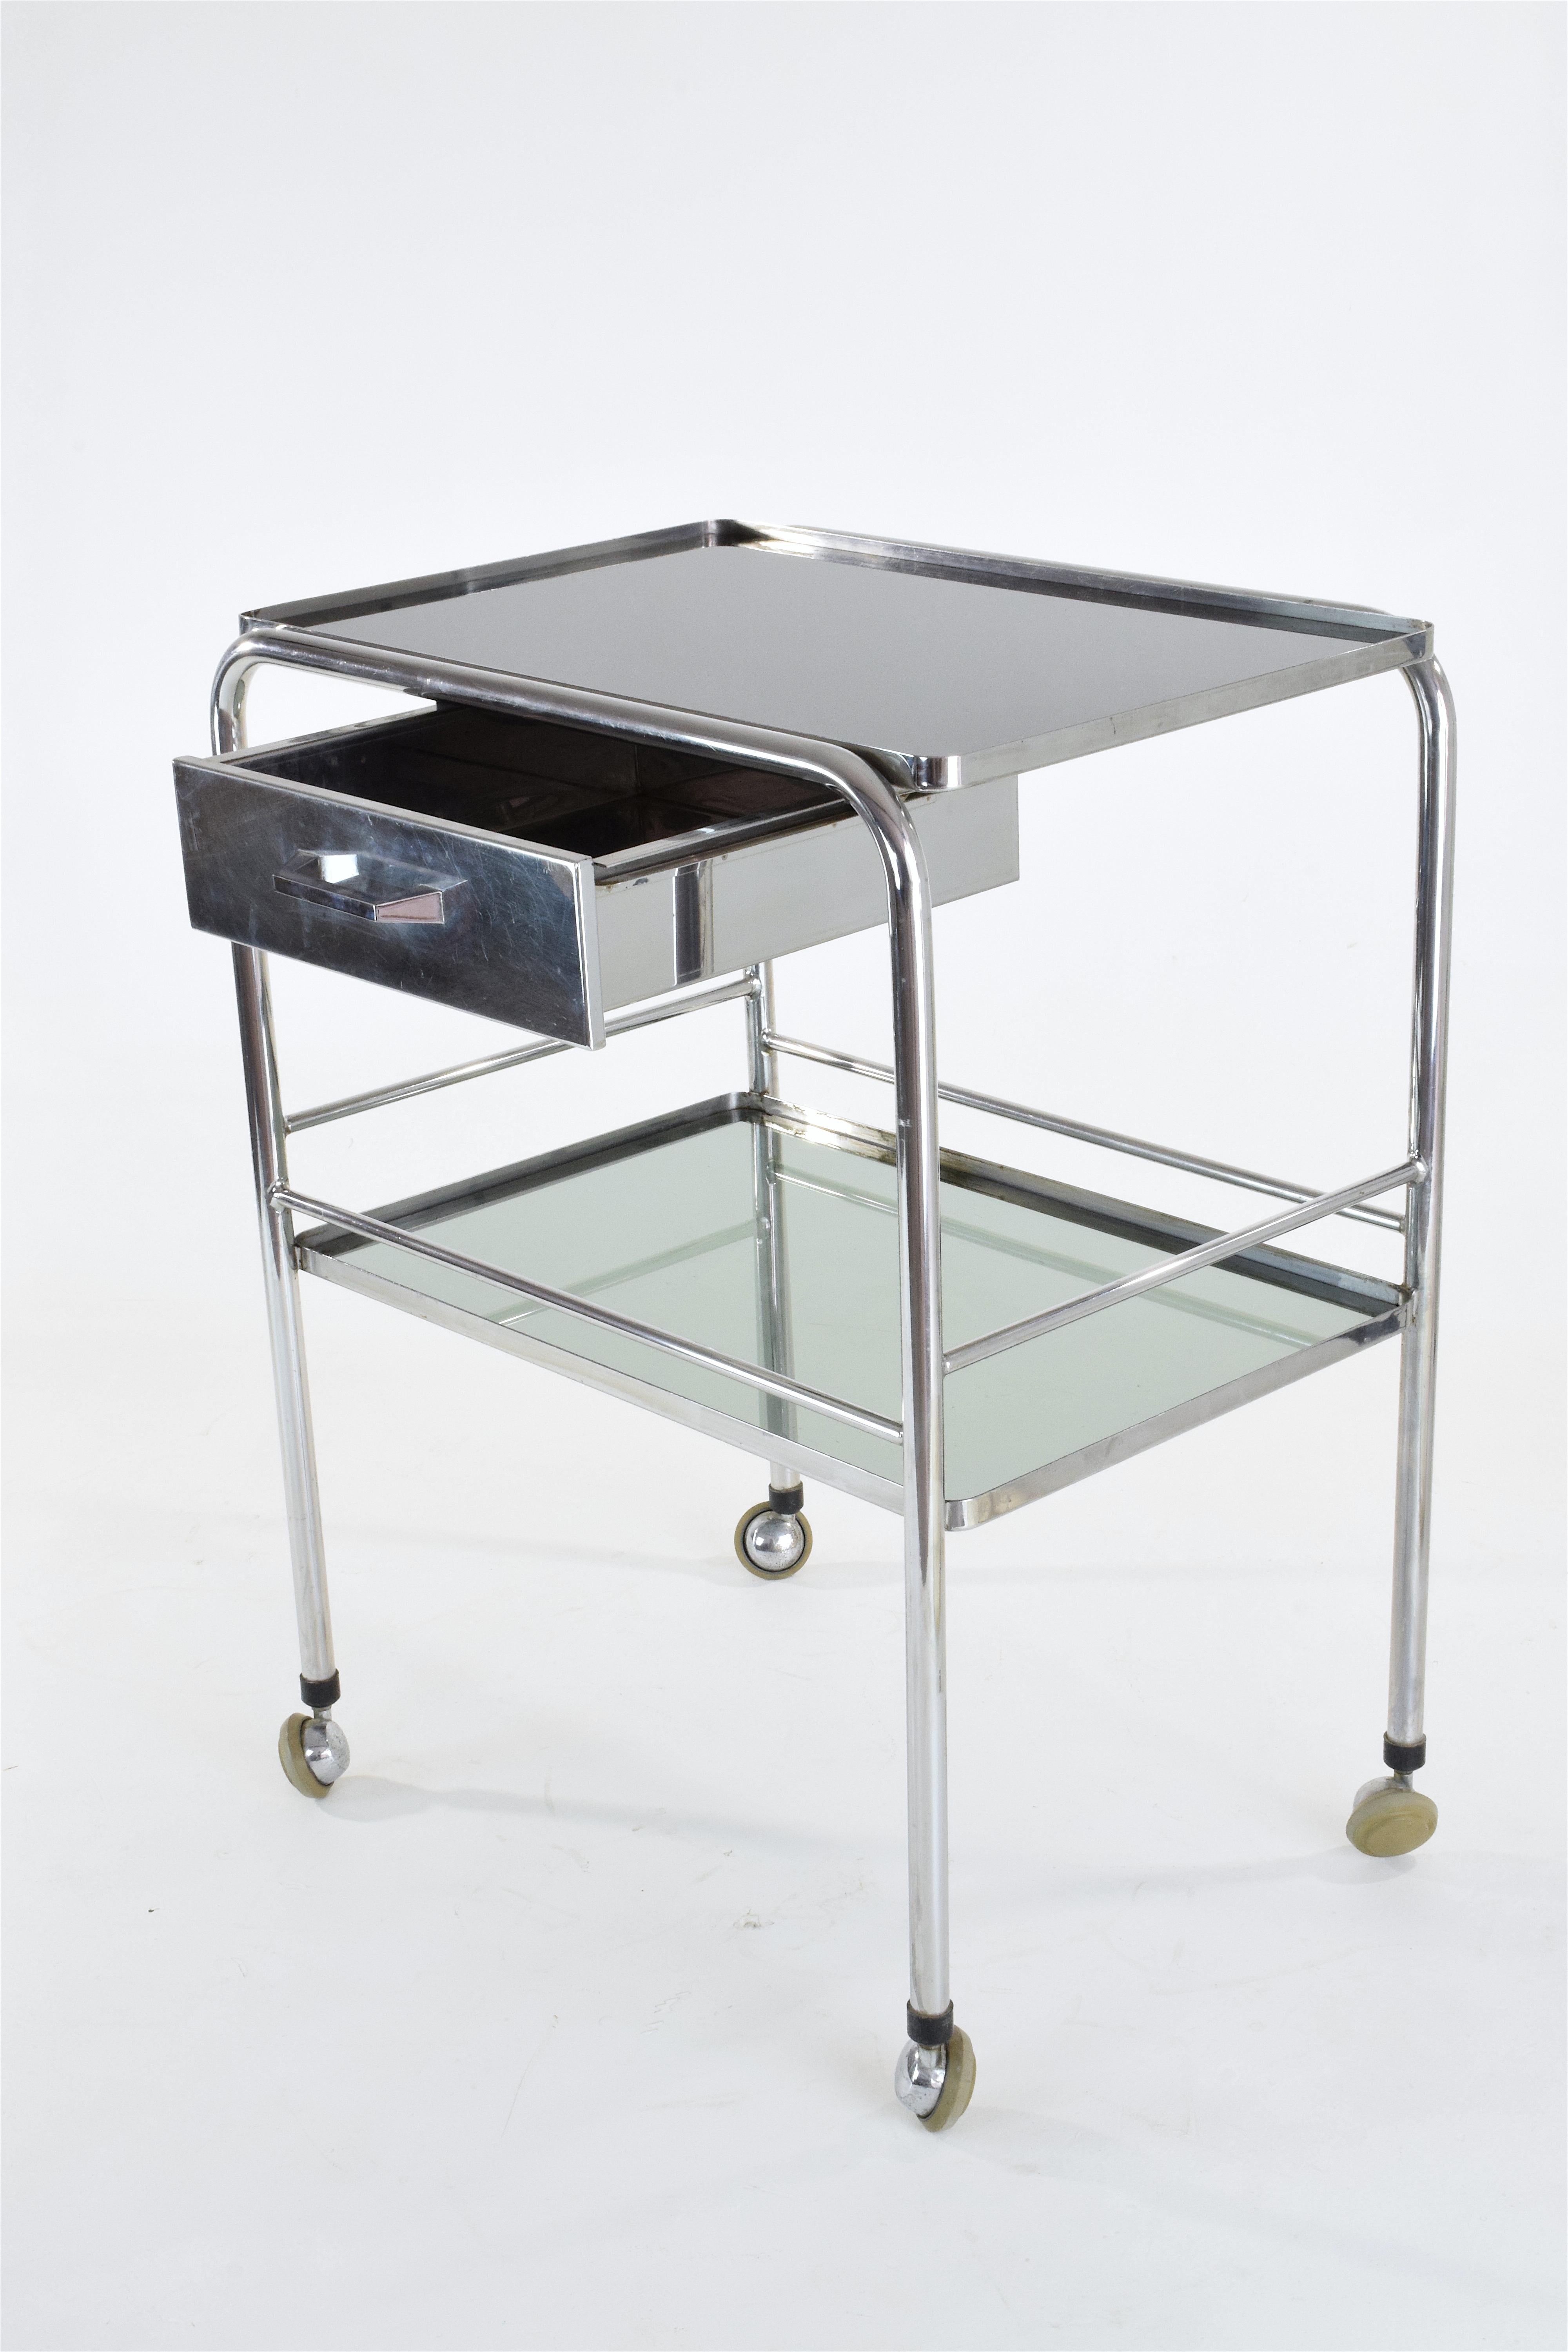 A 20th Century French medical cart in stainless steel with two glass shelves, one drawer and rollers. 
Could be used as an original bar cart since it is practical to move around or as a great storage space, bathroom vanity or cabinet.
 
-----

We